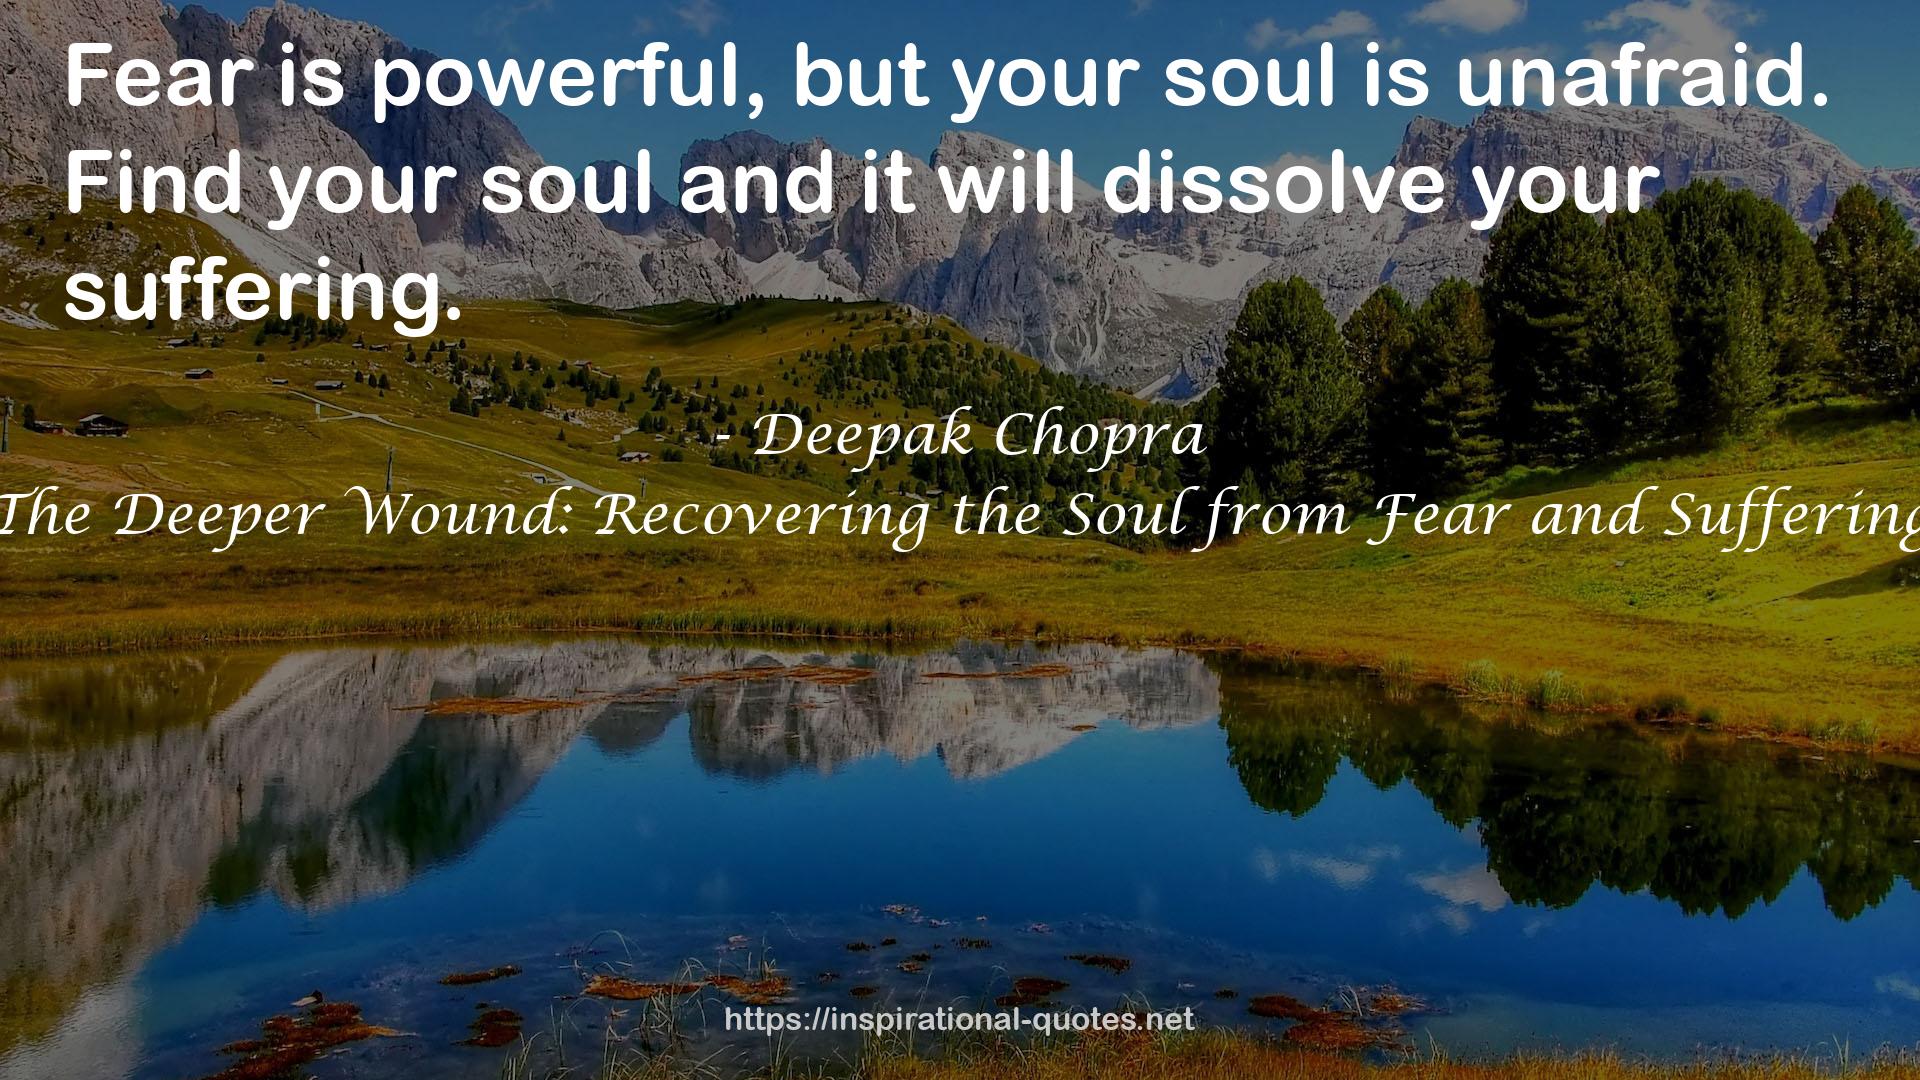 The Deeper Wound: Recovering the Soul from Fear and Suffering QUOTES